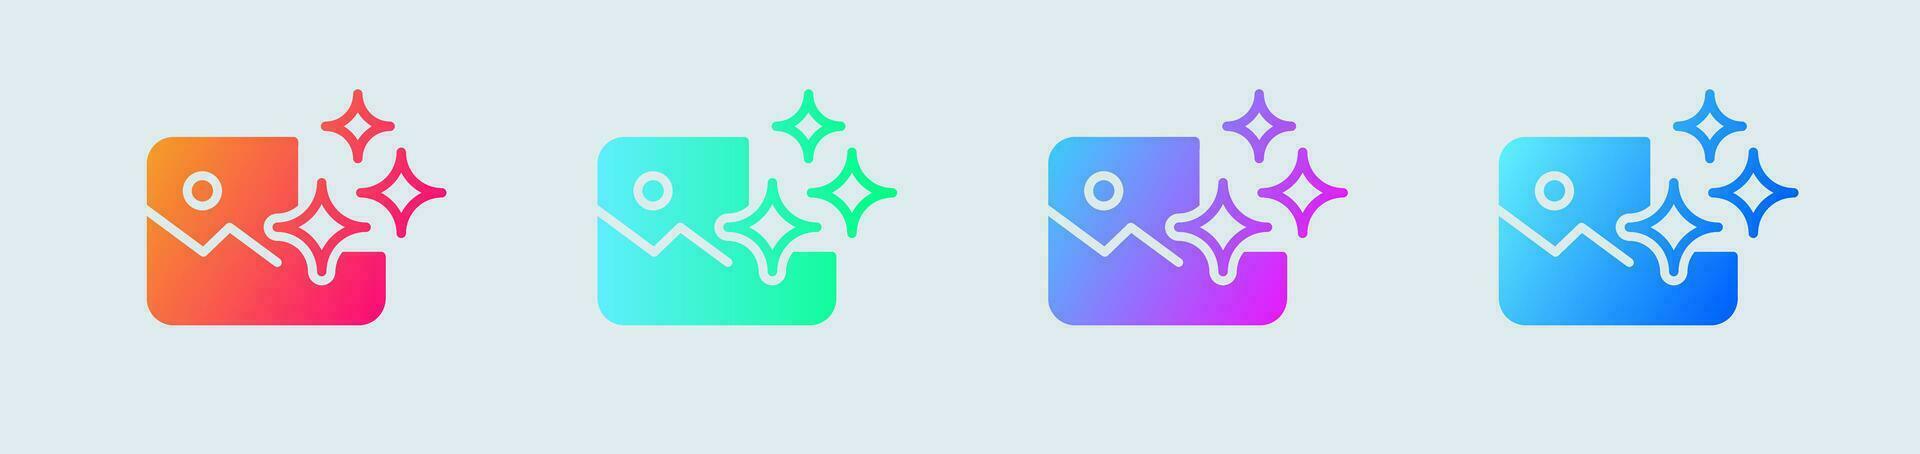 Effect solid icon in gradient colors. Spark signs vector illustration.